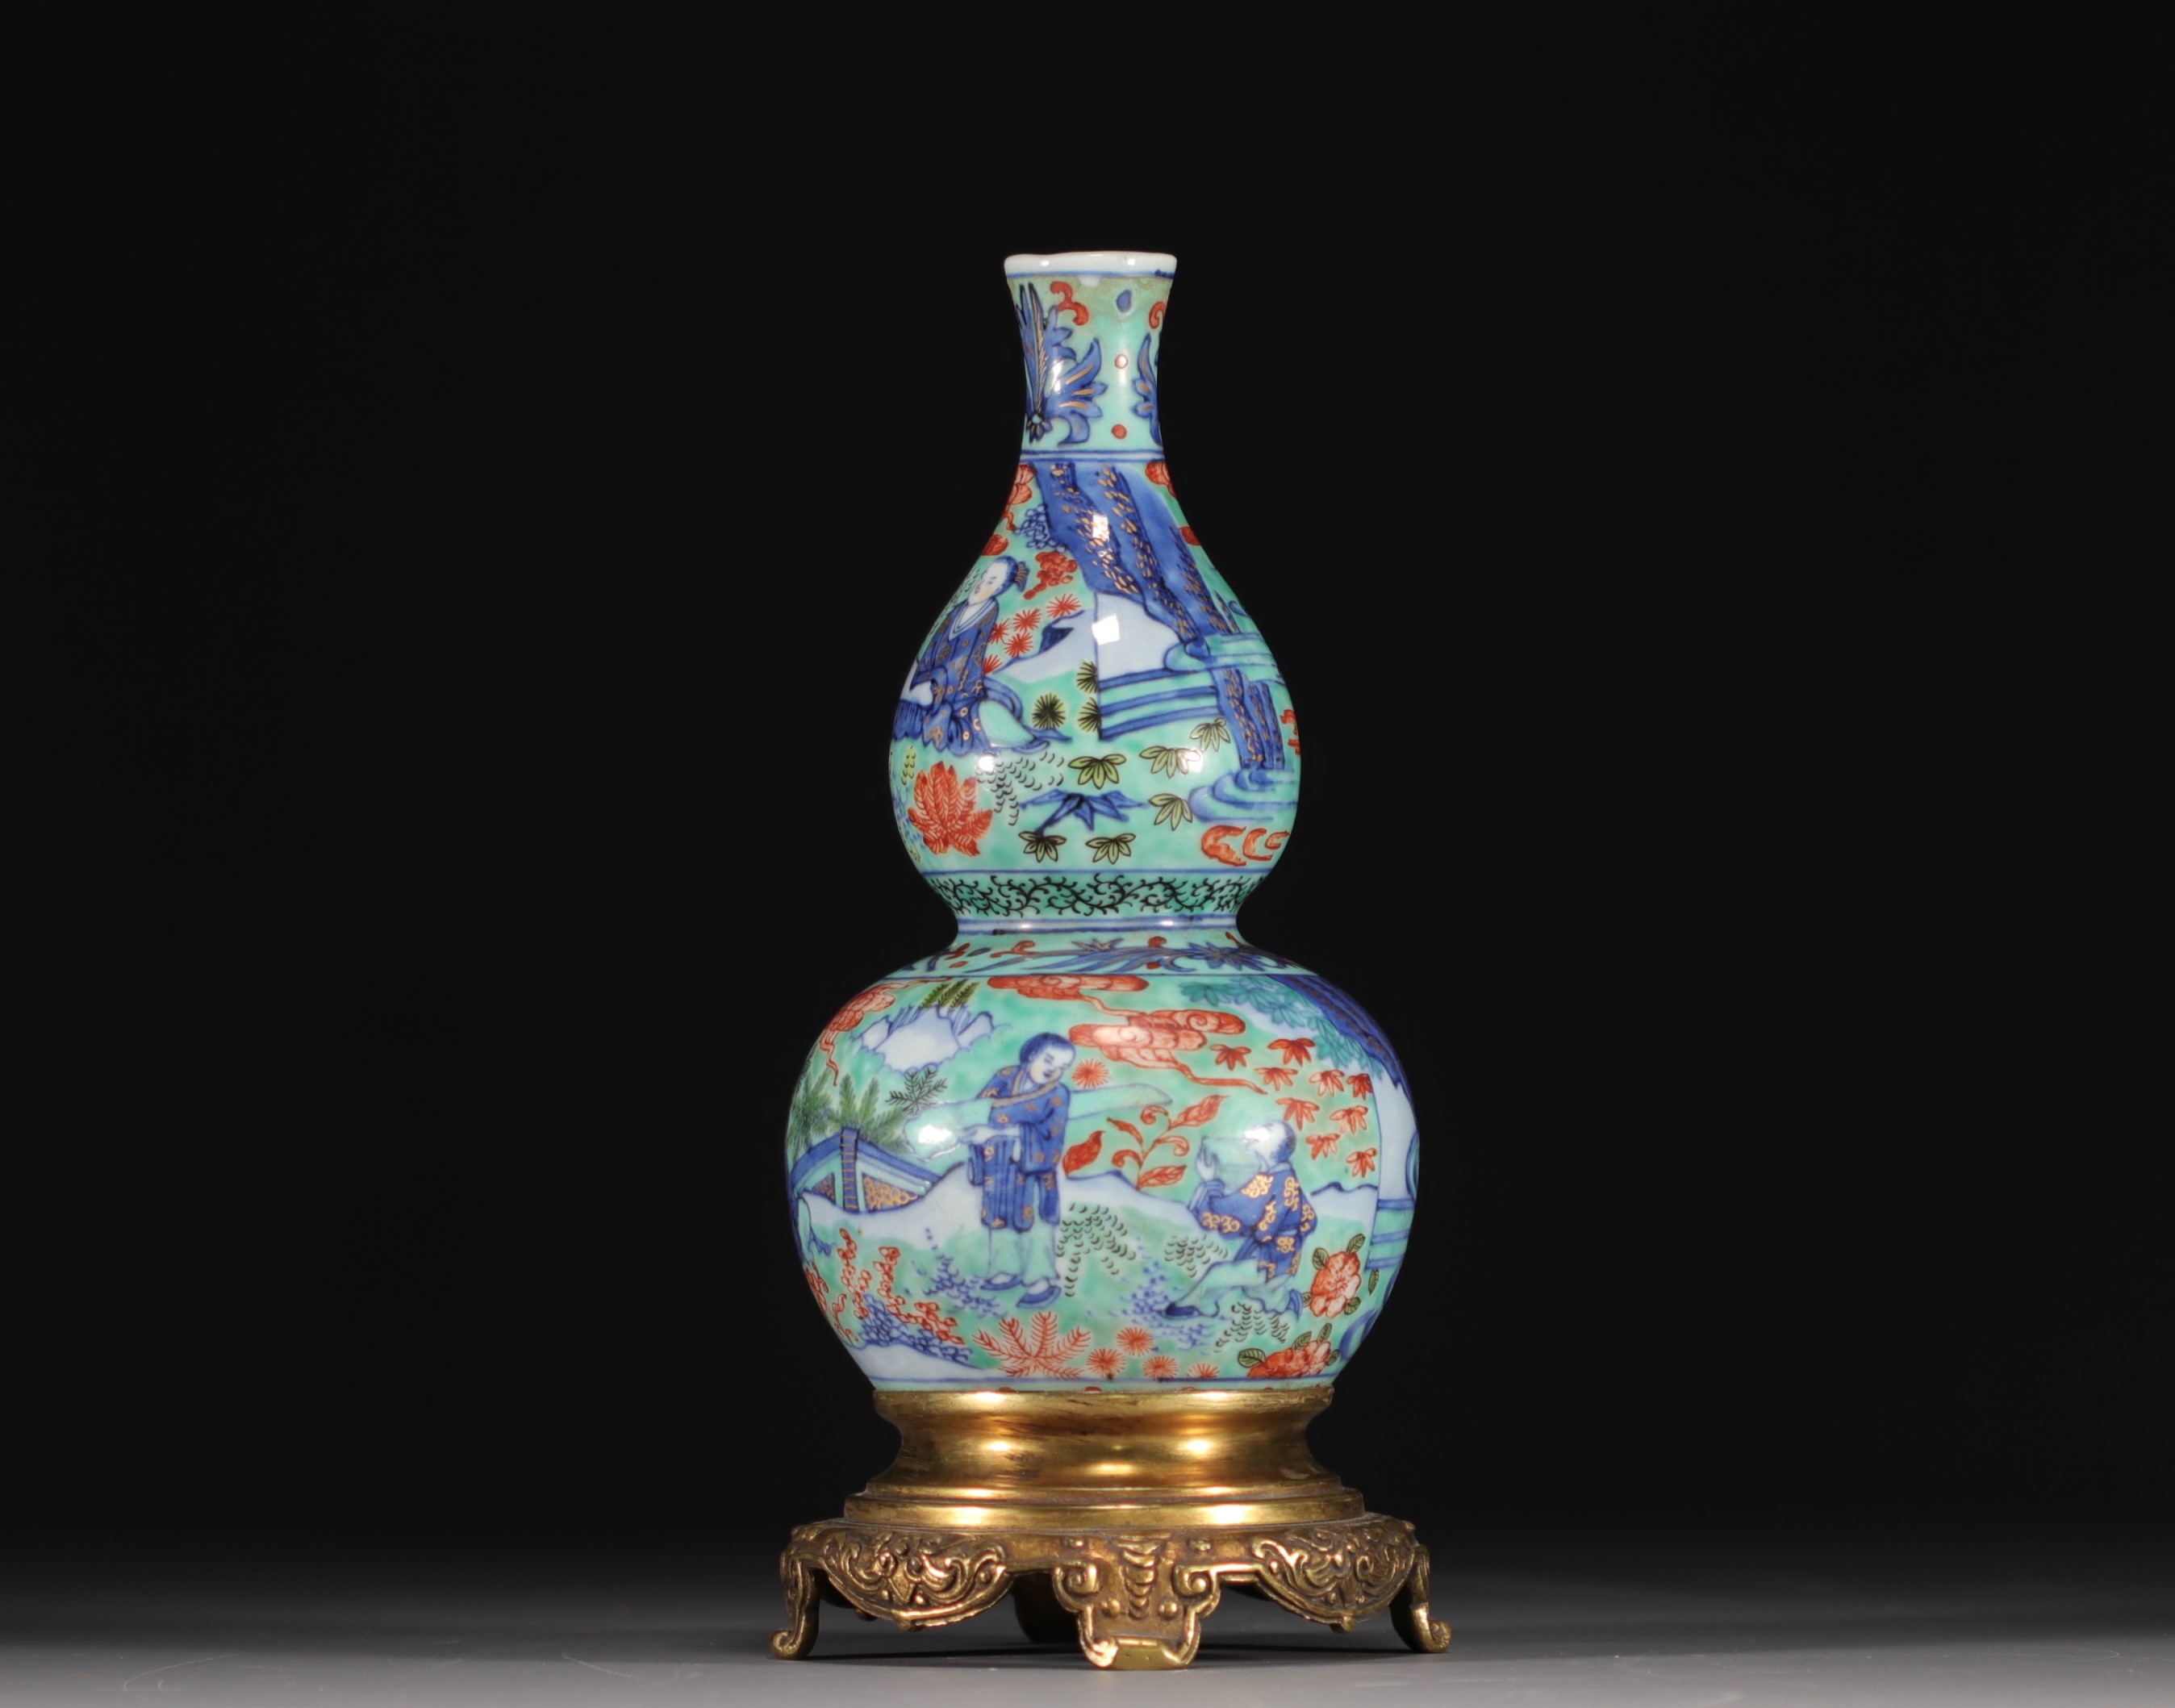 China - Porcelain double gourd vase with figures, gilt bronze mounting, Qing period. - Image 3 of 6